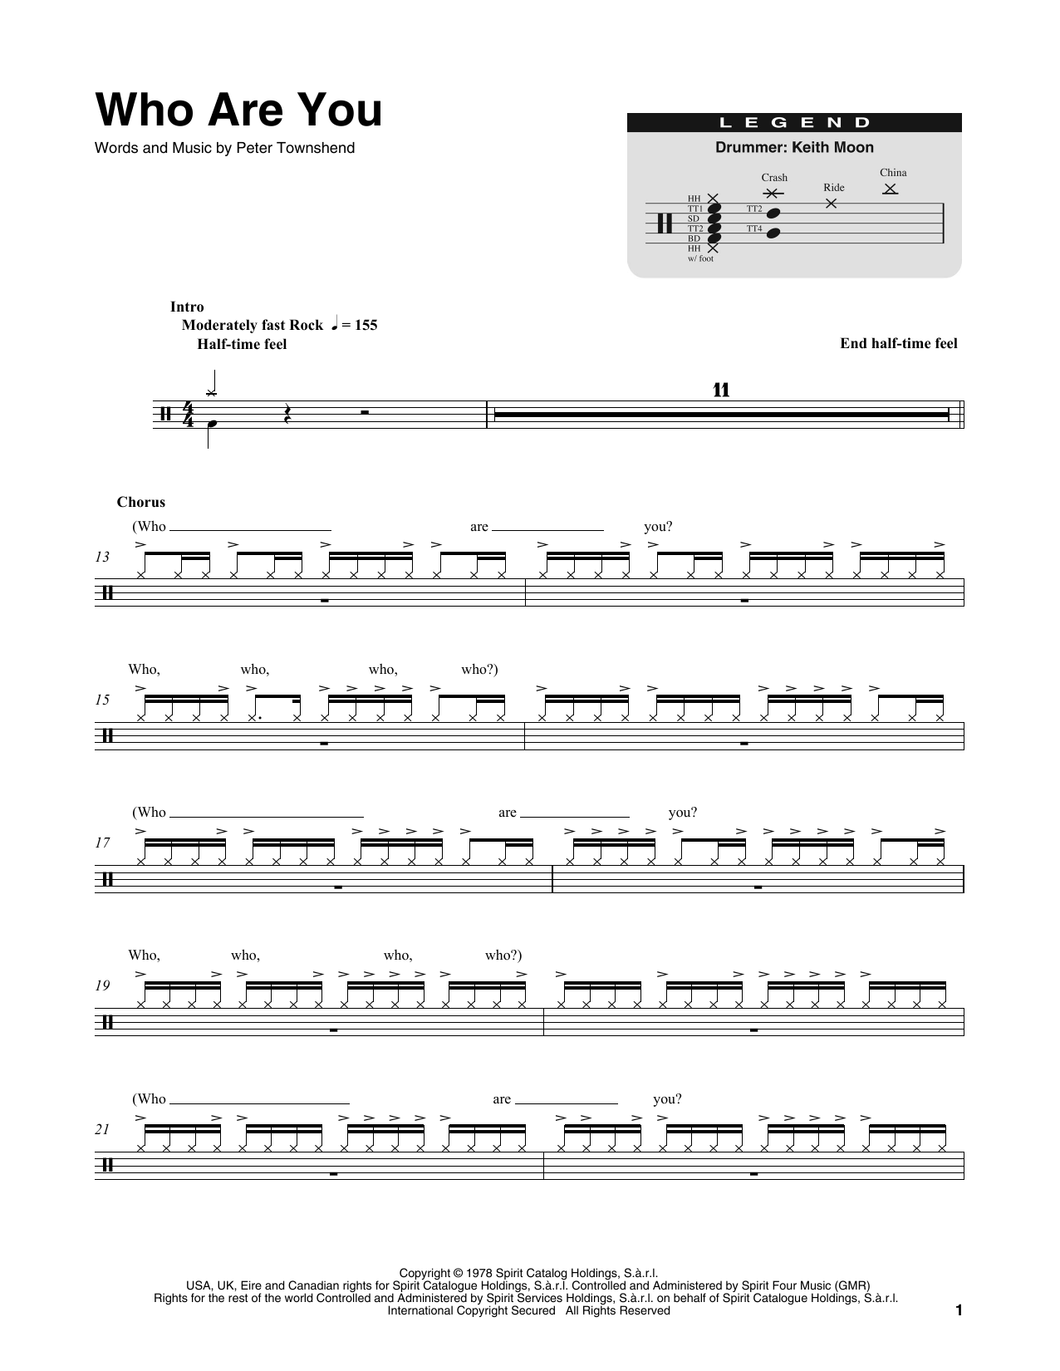 Who Are You - The Who - Full Drum Transcription / Drum Sheet Music - SheetMusicDirect DT